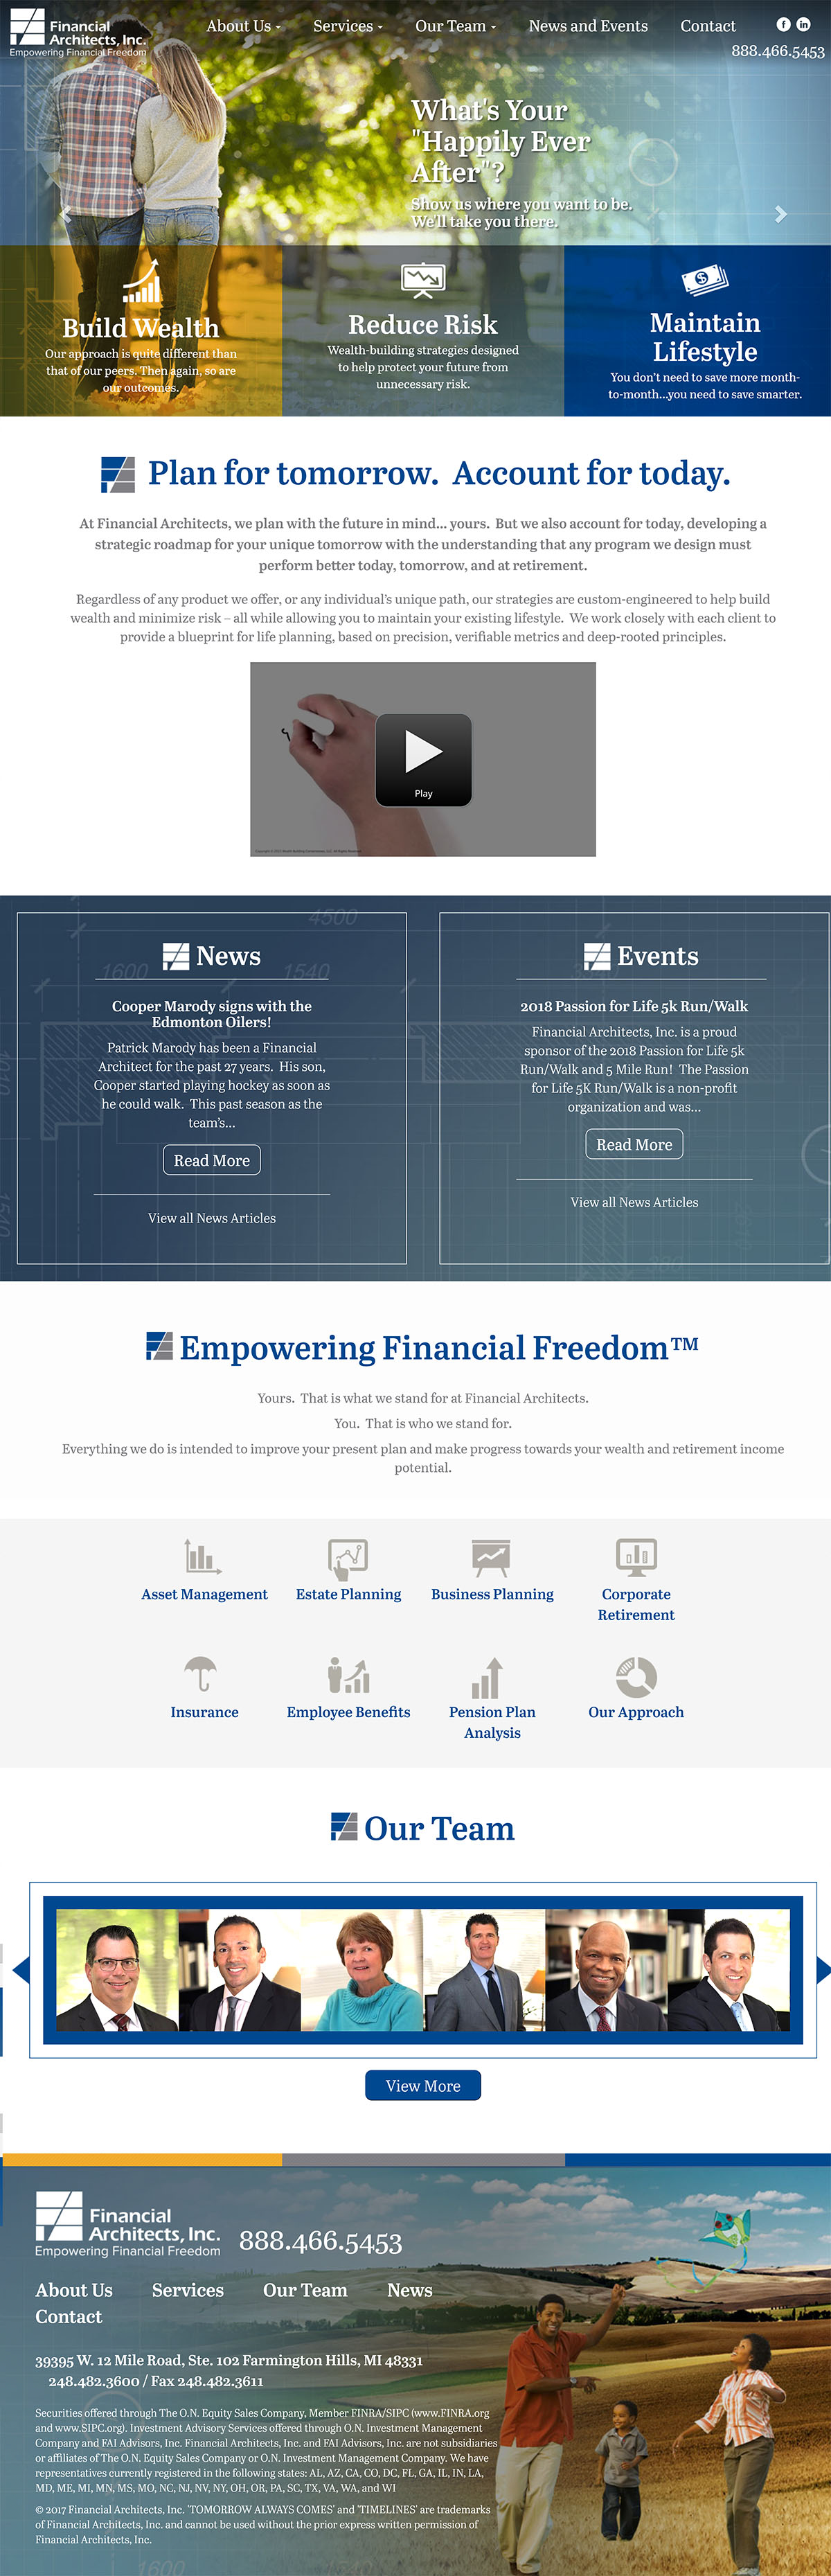 Financial Architects Homepage